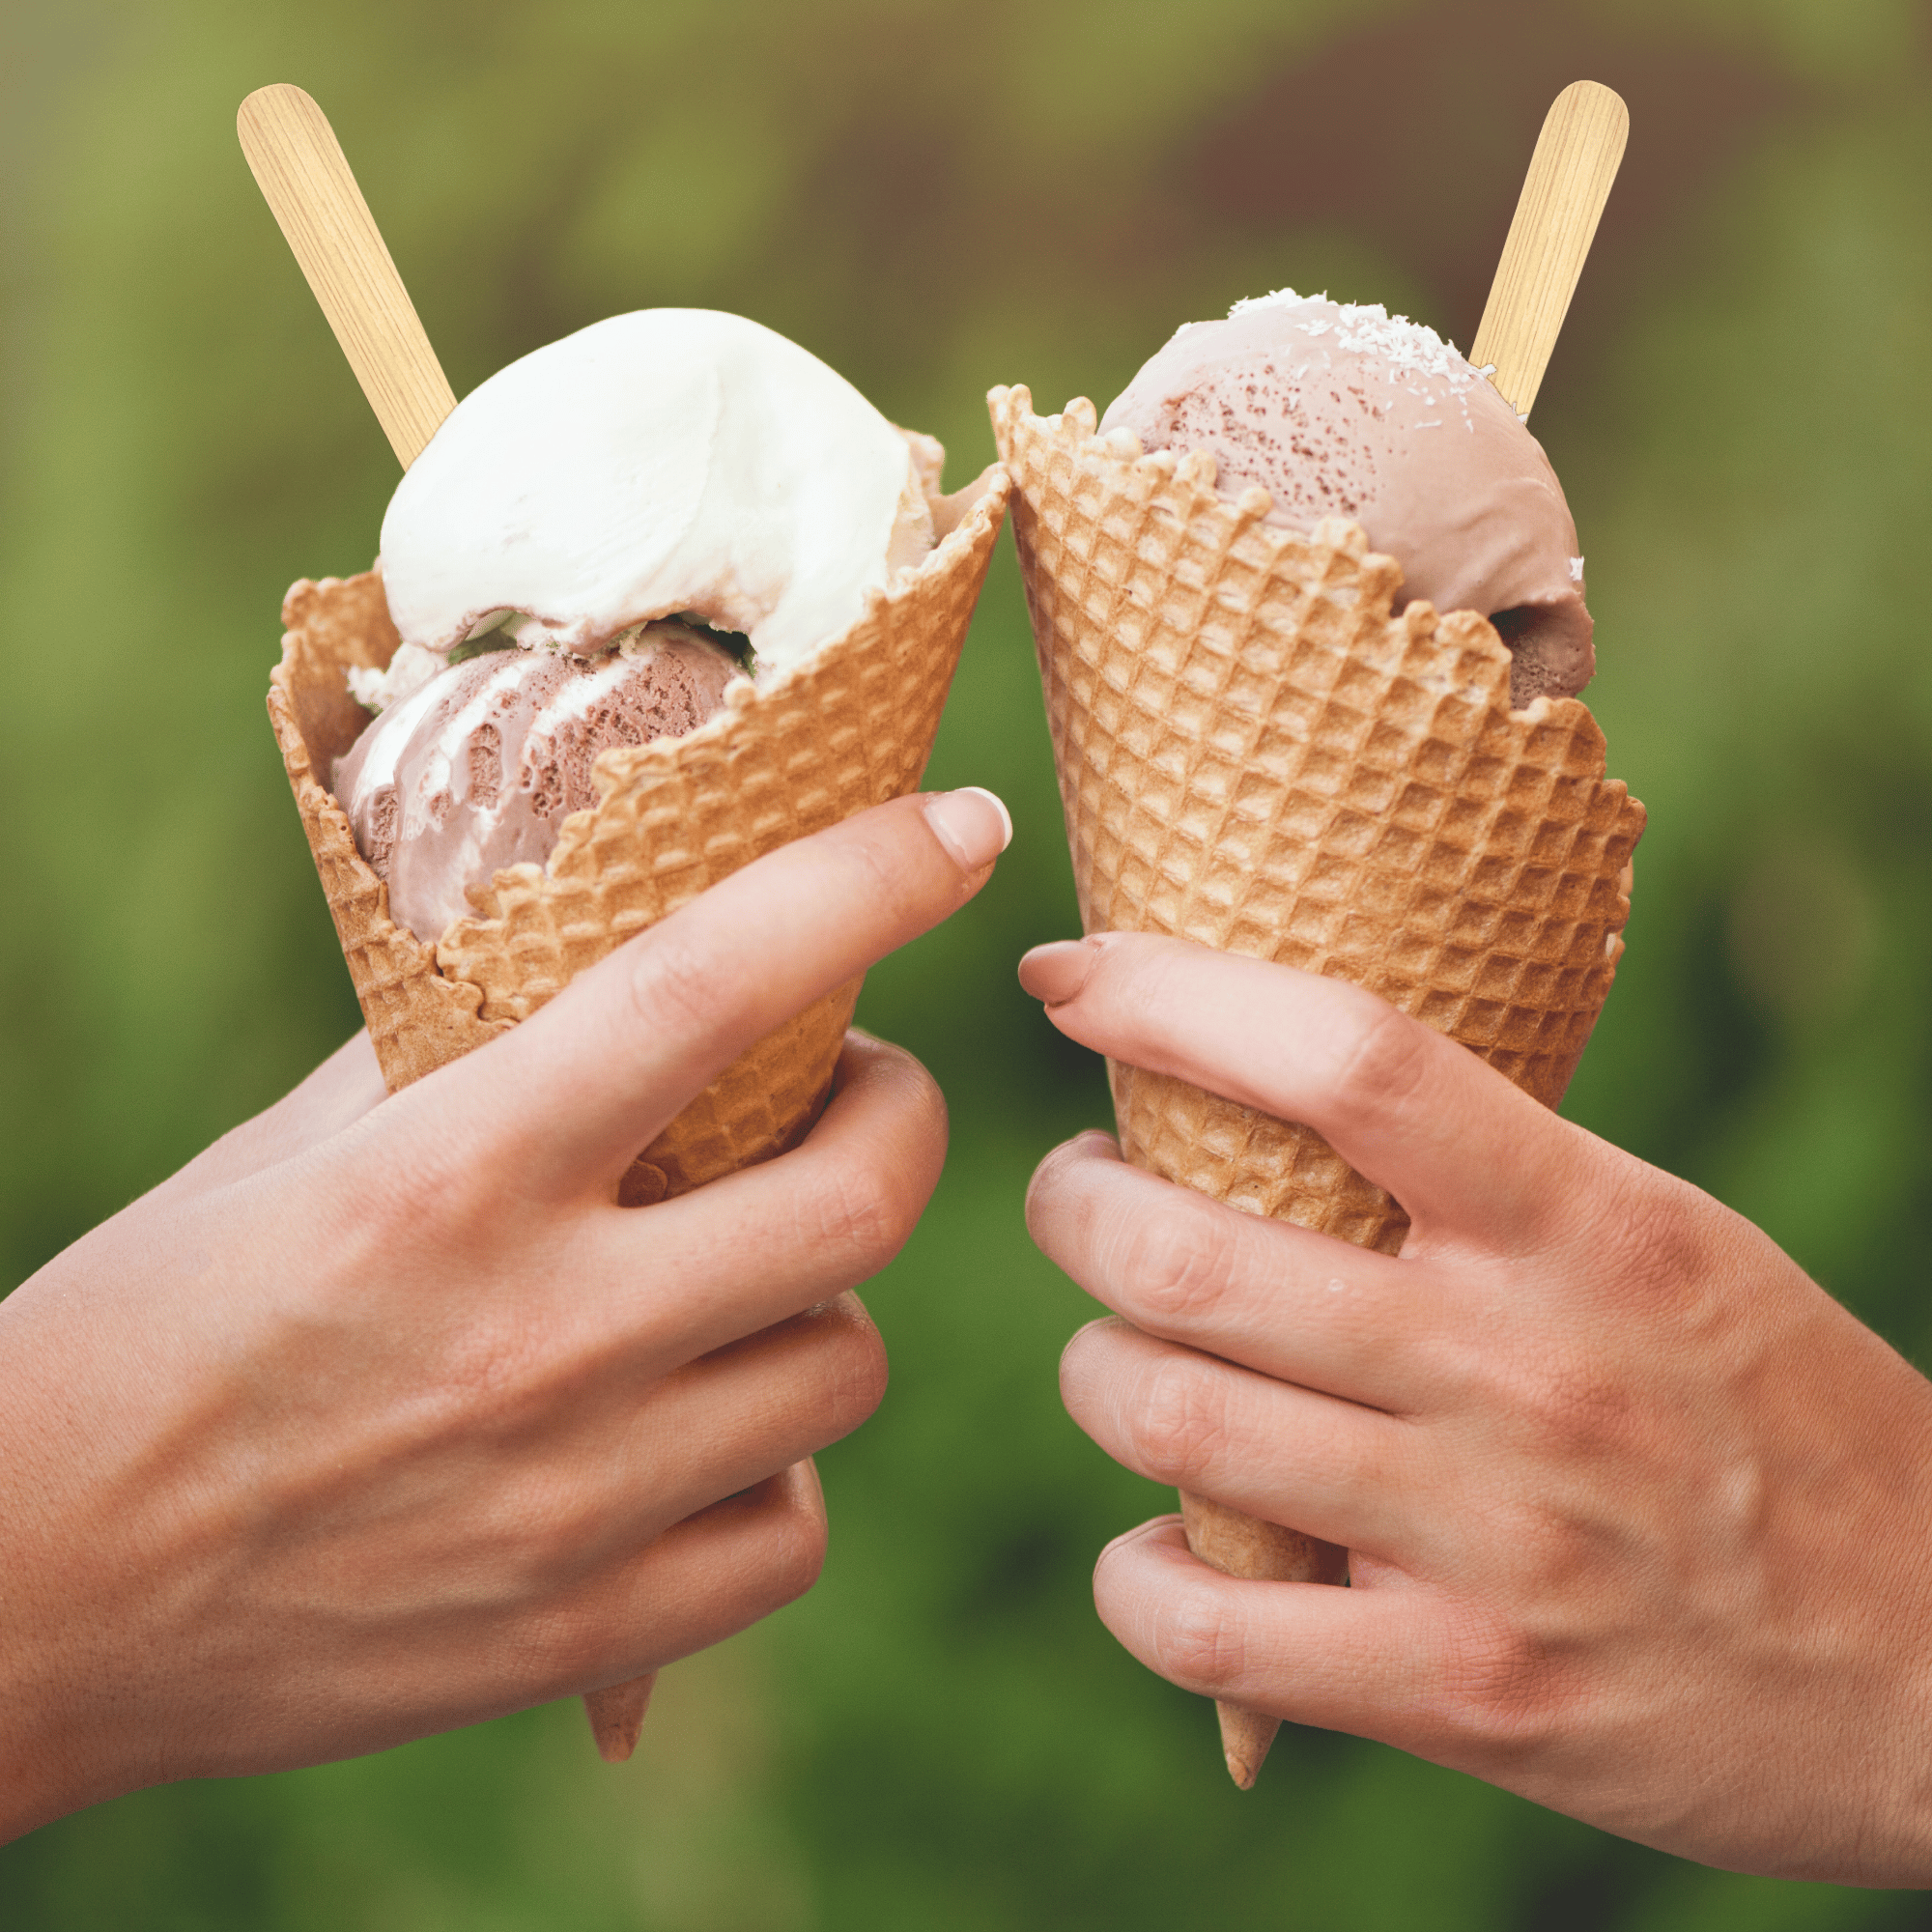 Two hands holding waffle cones with scoops of ice cream, the left cone with a single scoop of vanilla and the right cone with a scoop of chocolate and a scoop of strawberry. Both cones feature unwrapped taster bamboo spoons from Holy City Straw Co. The background is green and blurred, suggesting an outdoor setting